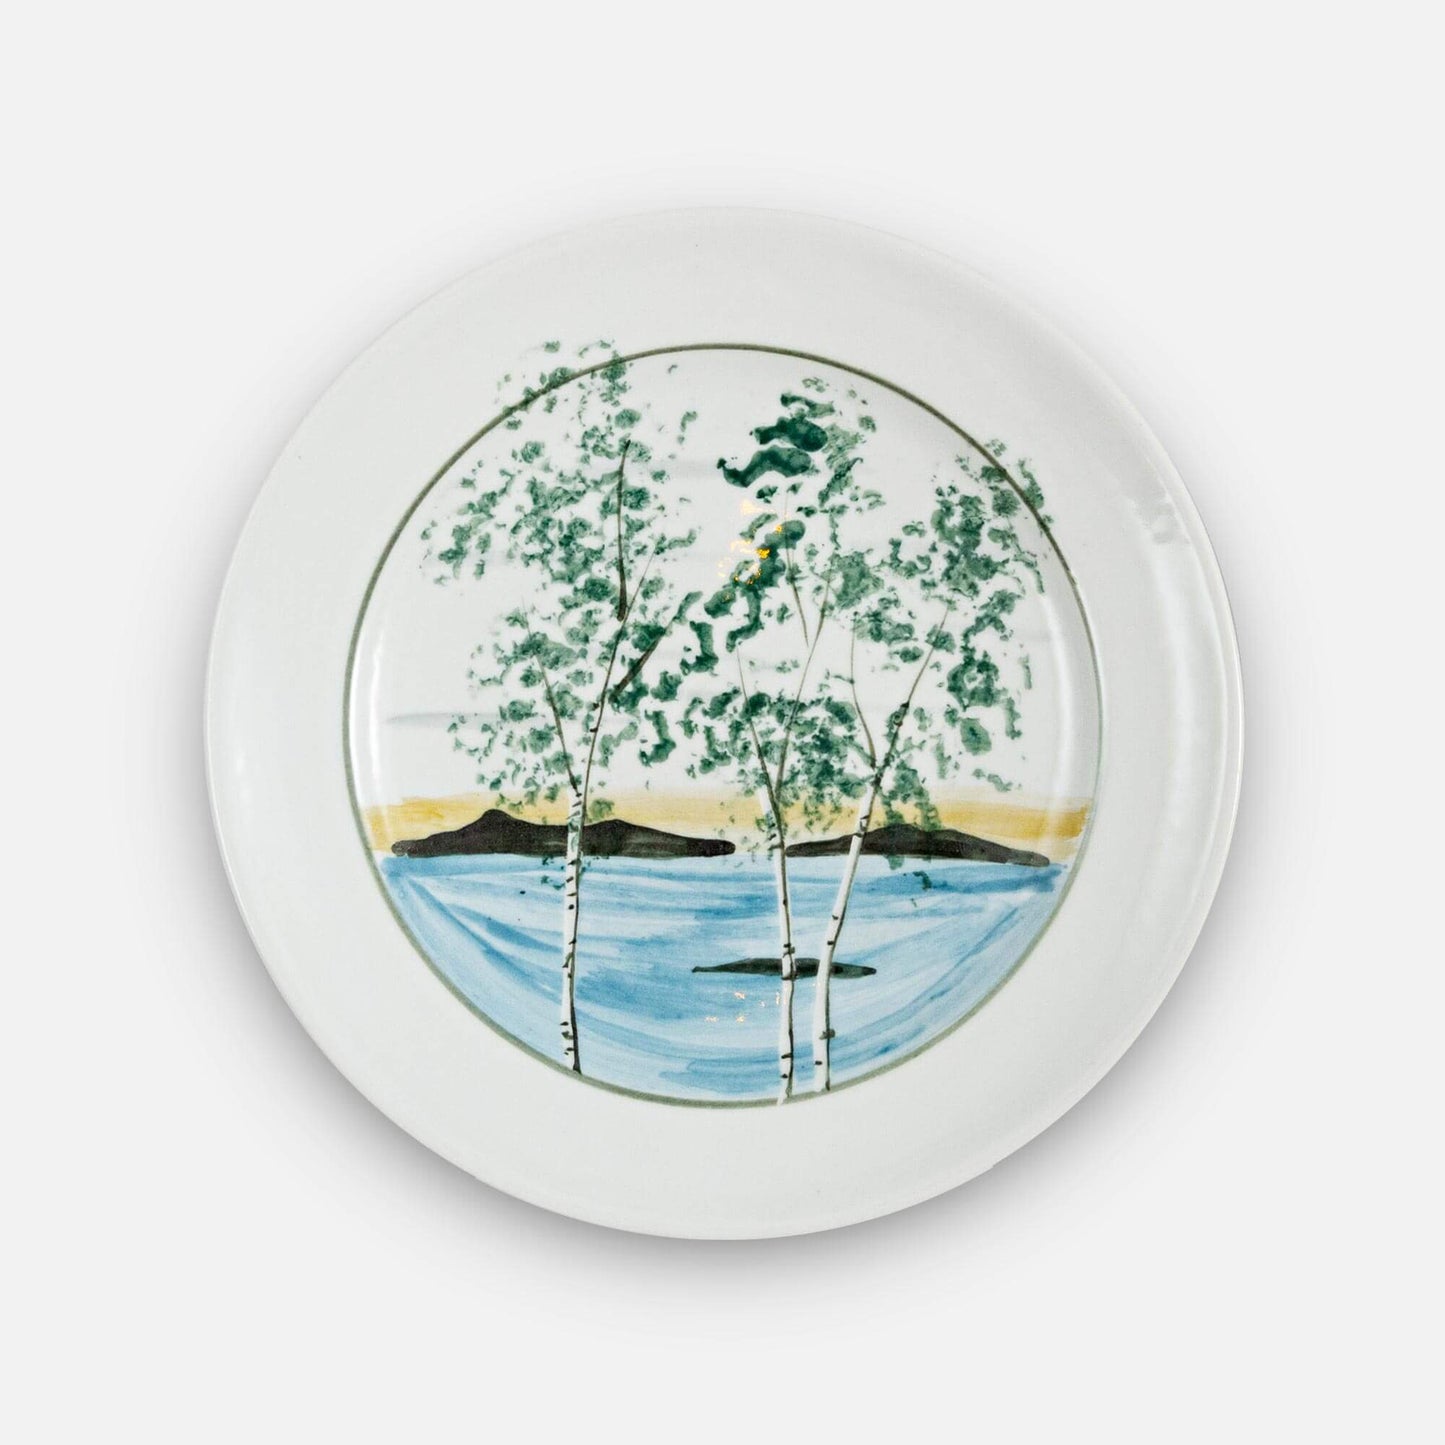 Handmade Pottery Rimless Dinner Plate made by Georgetown Pottery in Maine in Birch pattern